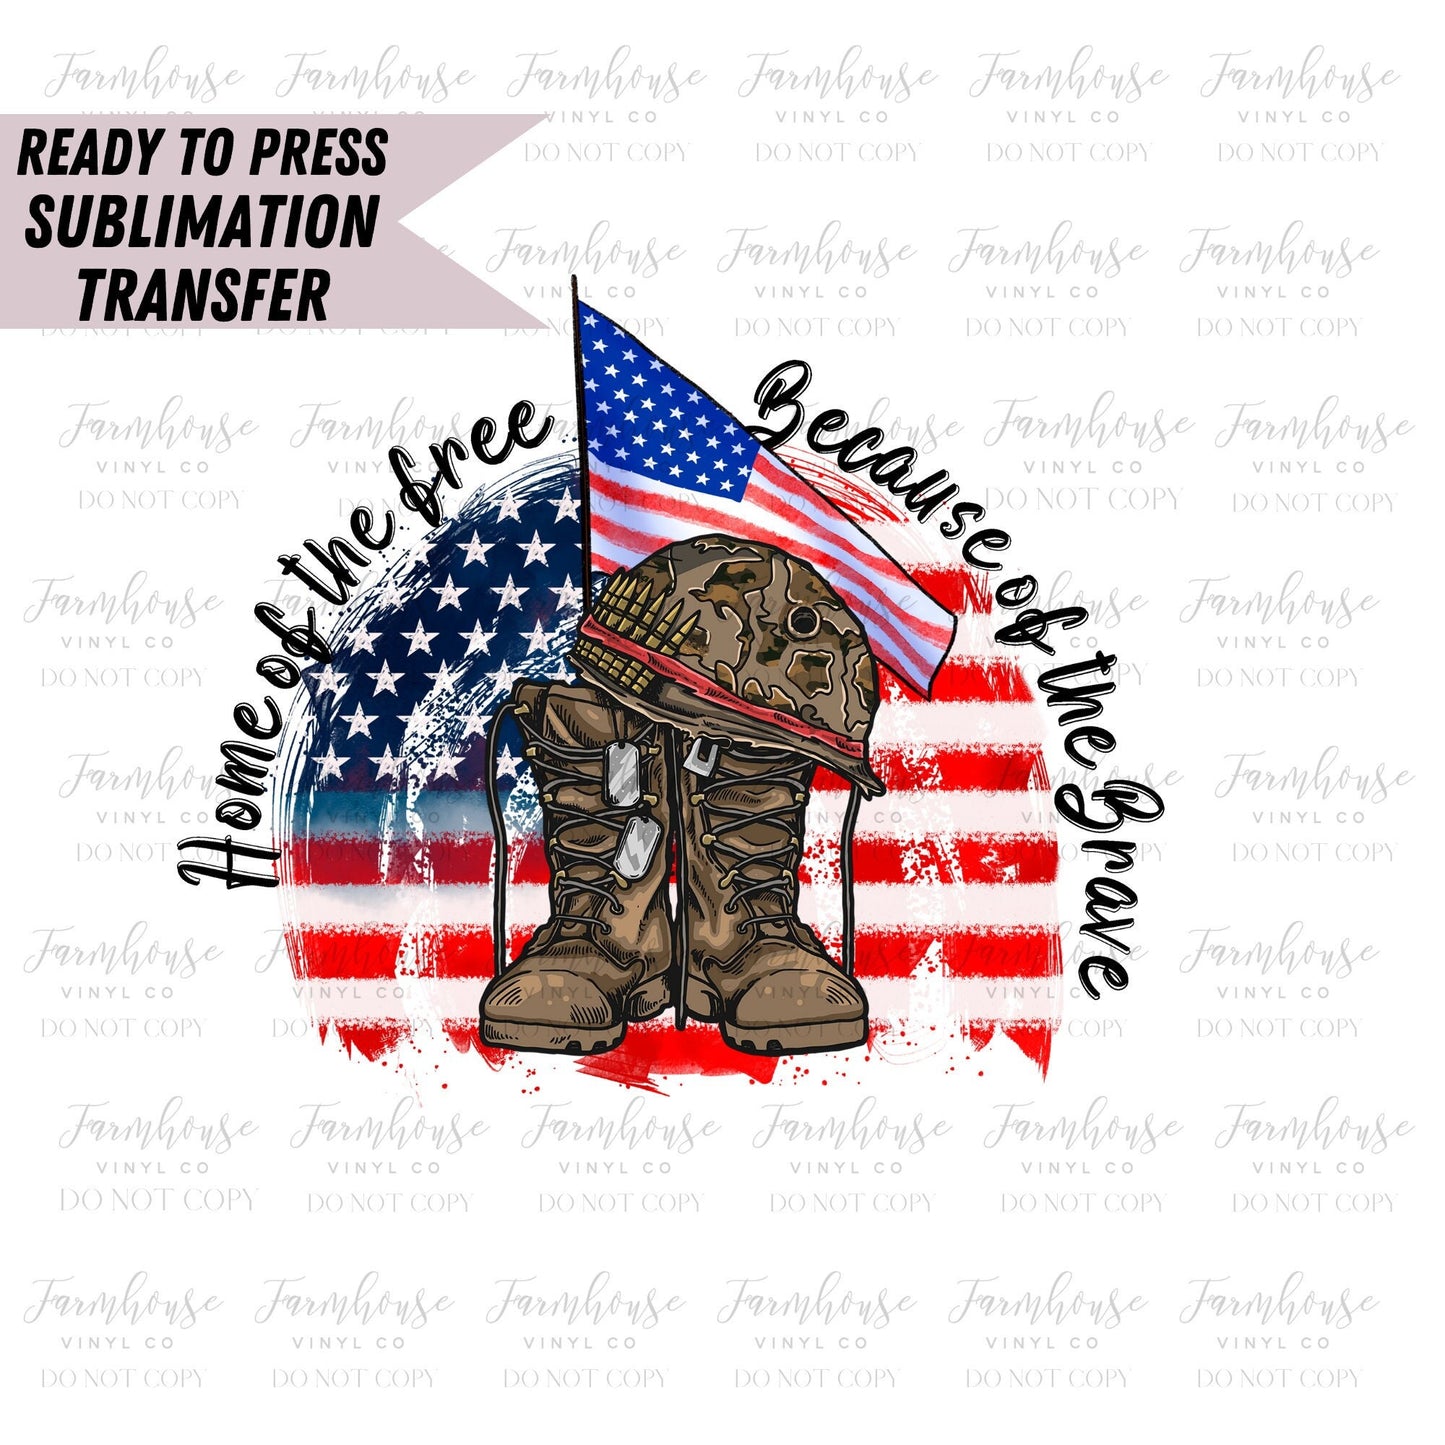 Home of the Free Because of the Brave, Ready to Press Sublimation Transfer, Sublimation Transfers, Heat Transfer, Military Boots, 4th July - Farmhouse Vinyl Co